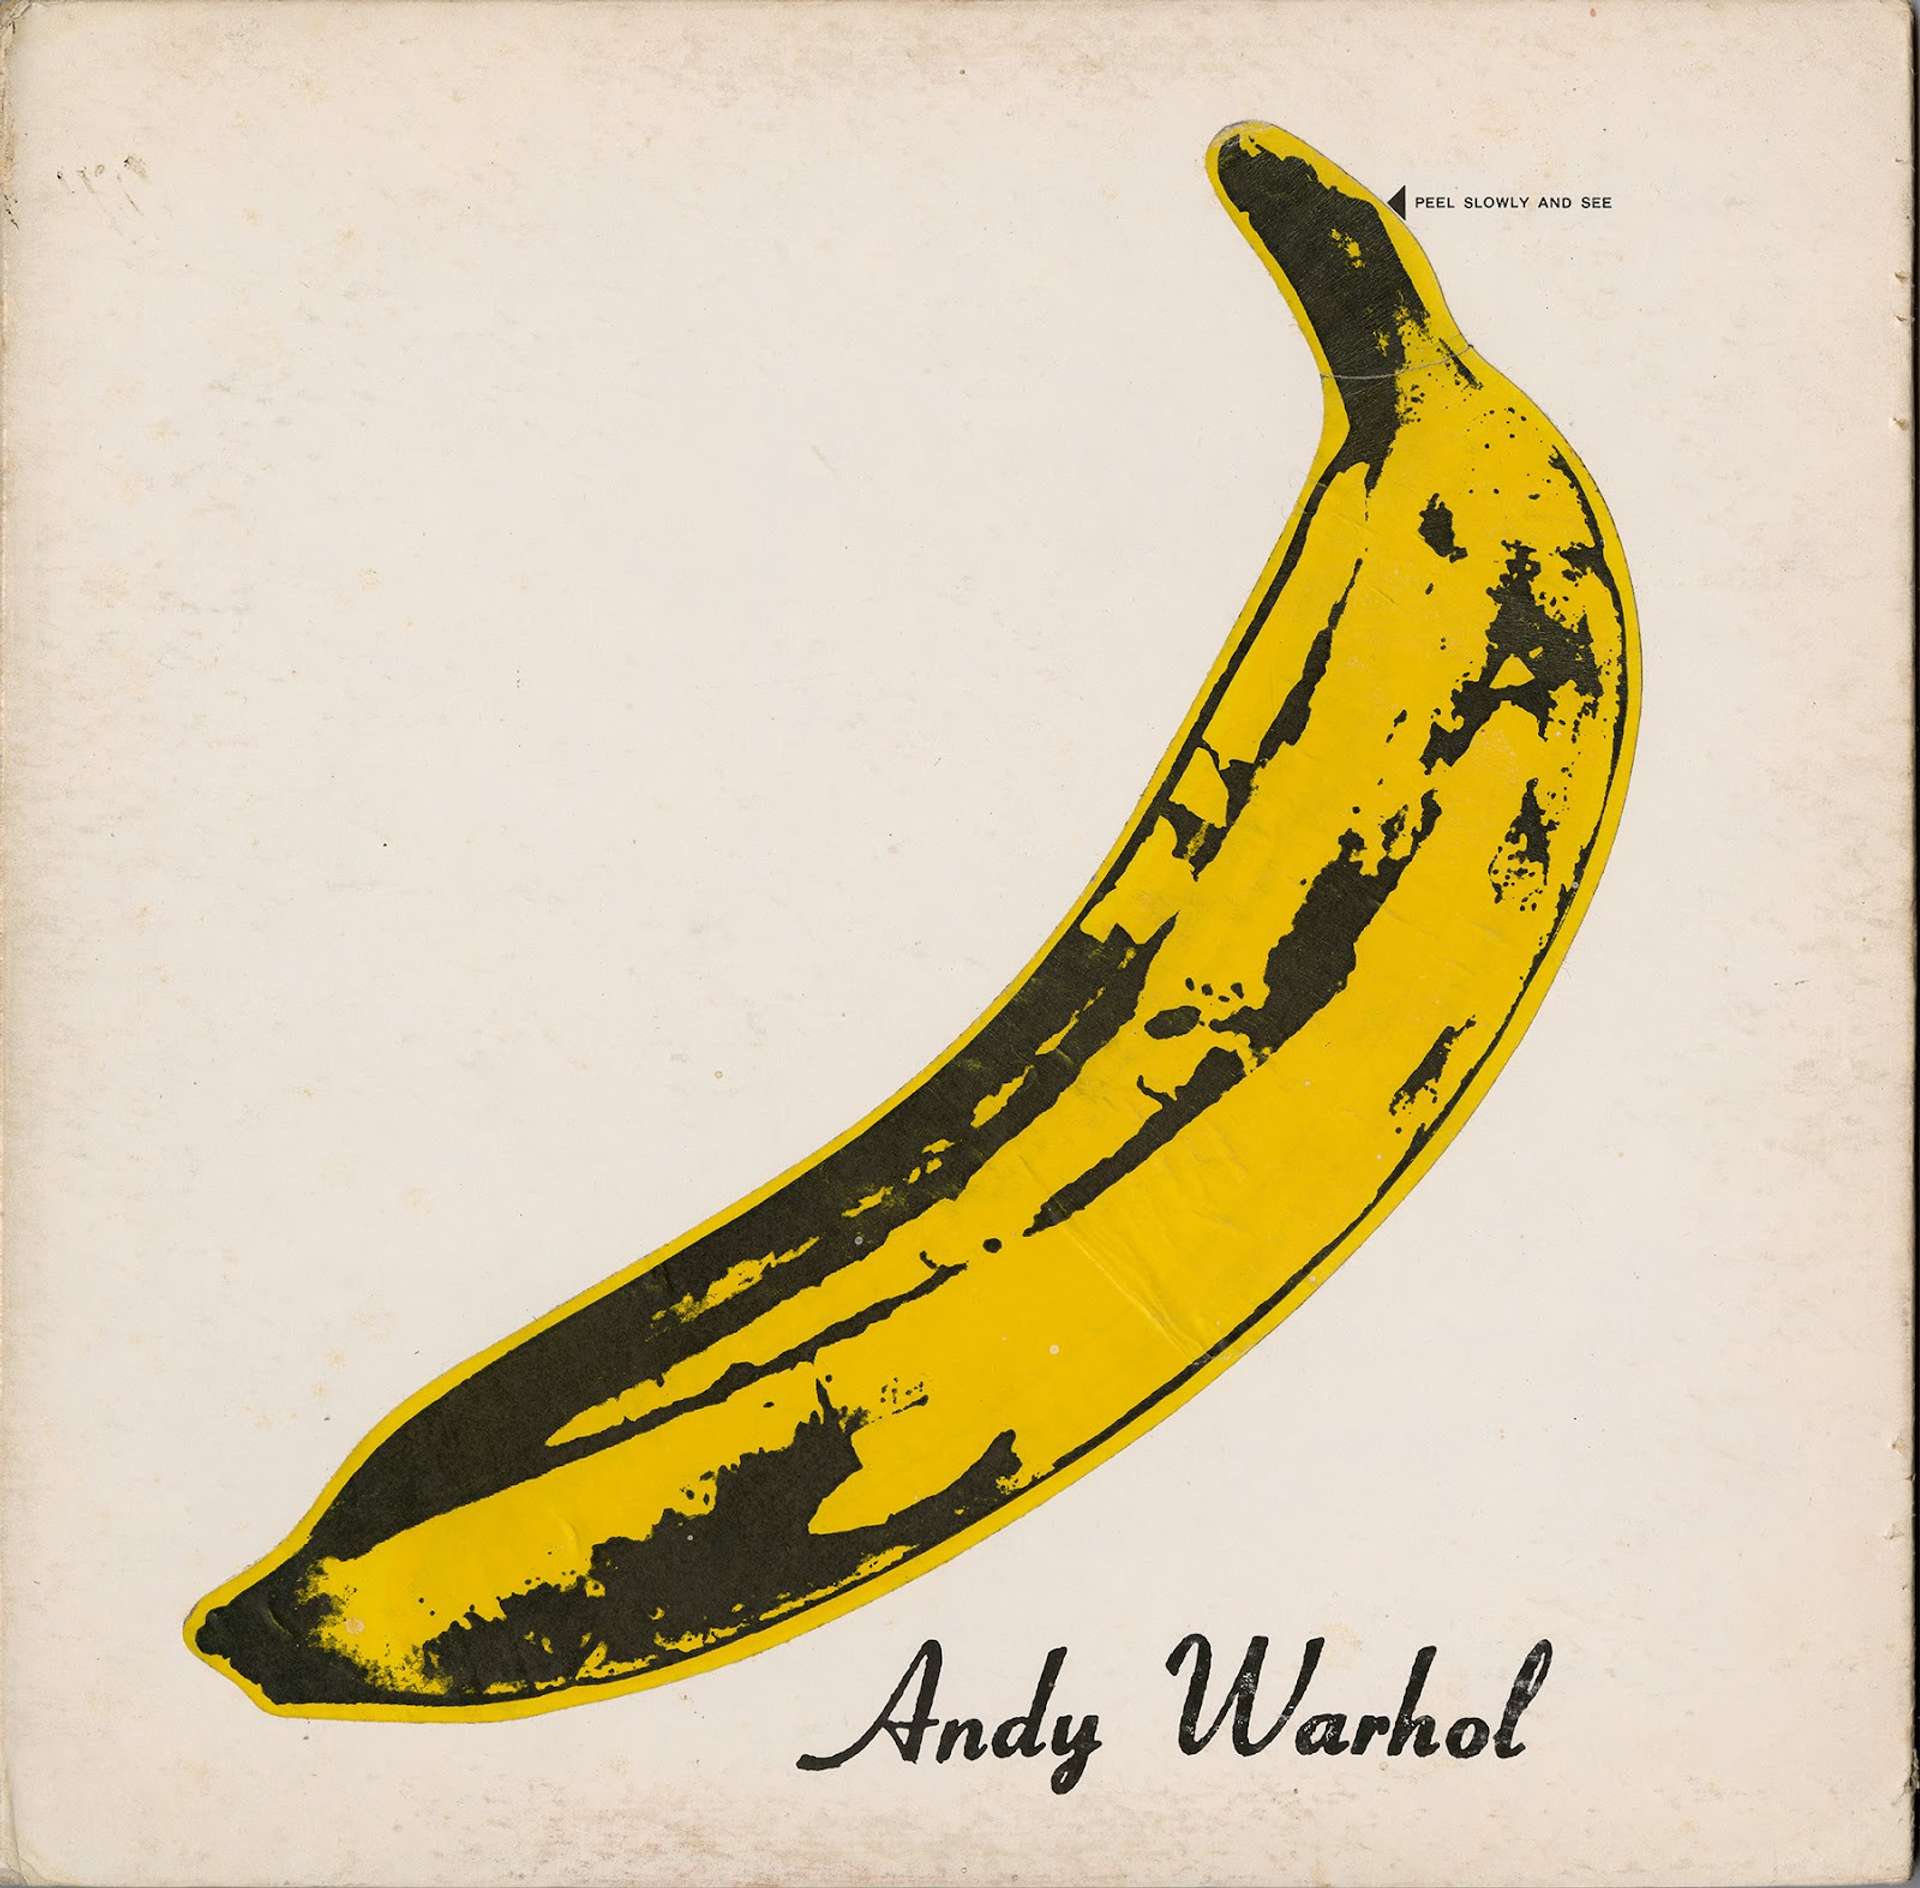 An image of the album cover for The Velvet Underground & Nico by artist Andy Warhol. It shows a bright yellow banana against a white background. The peel of the banana is removable, revealing a pink flesh underneath.